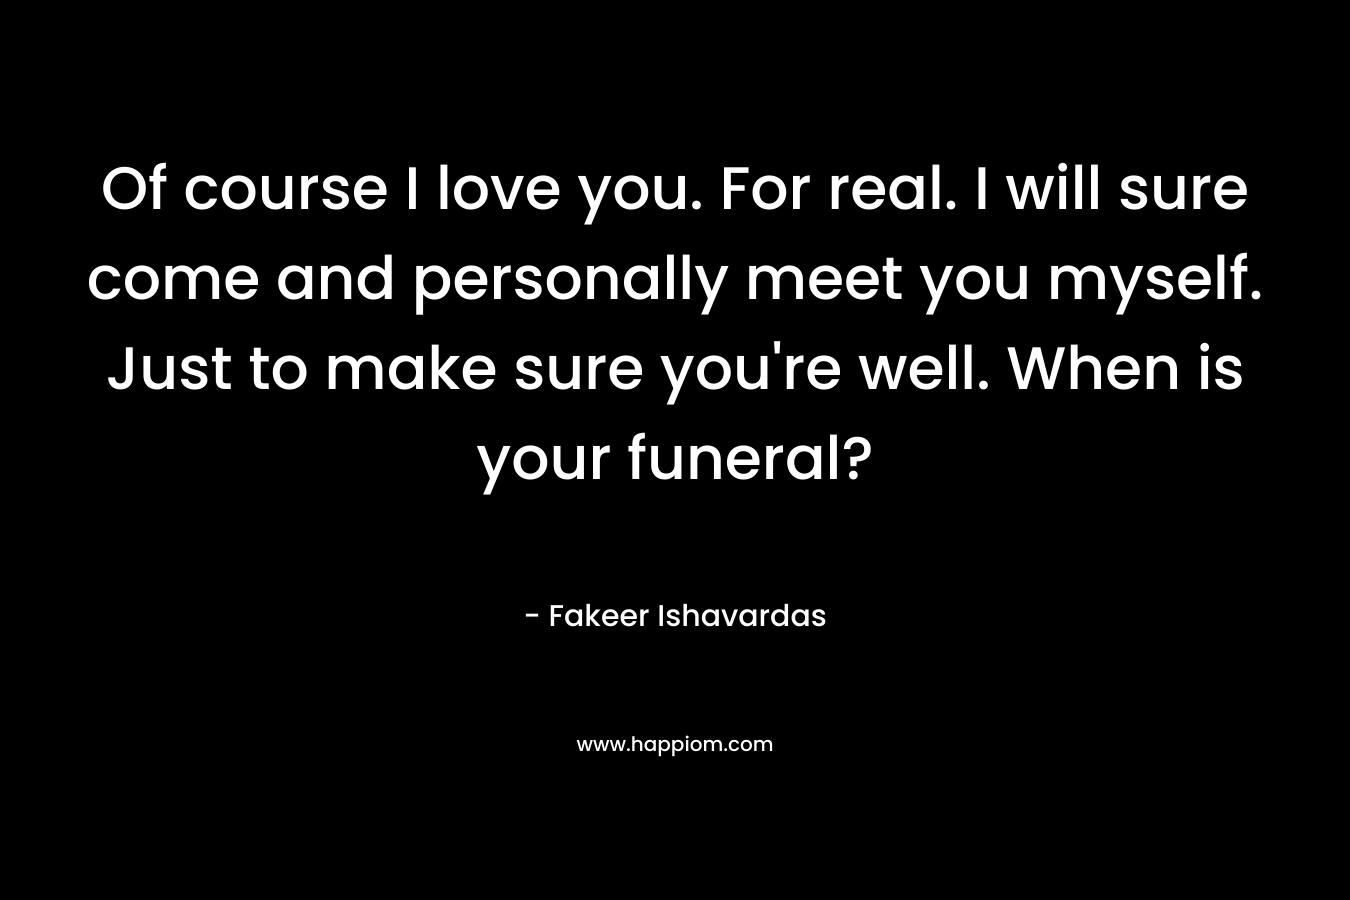 Of course I love you. For real. I will sure come and personally meet you myself. Just to make sure you’re well. When is your funeral? – Fakeer Ishavardas